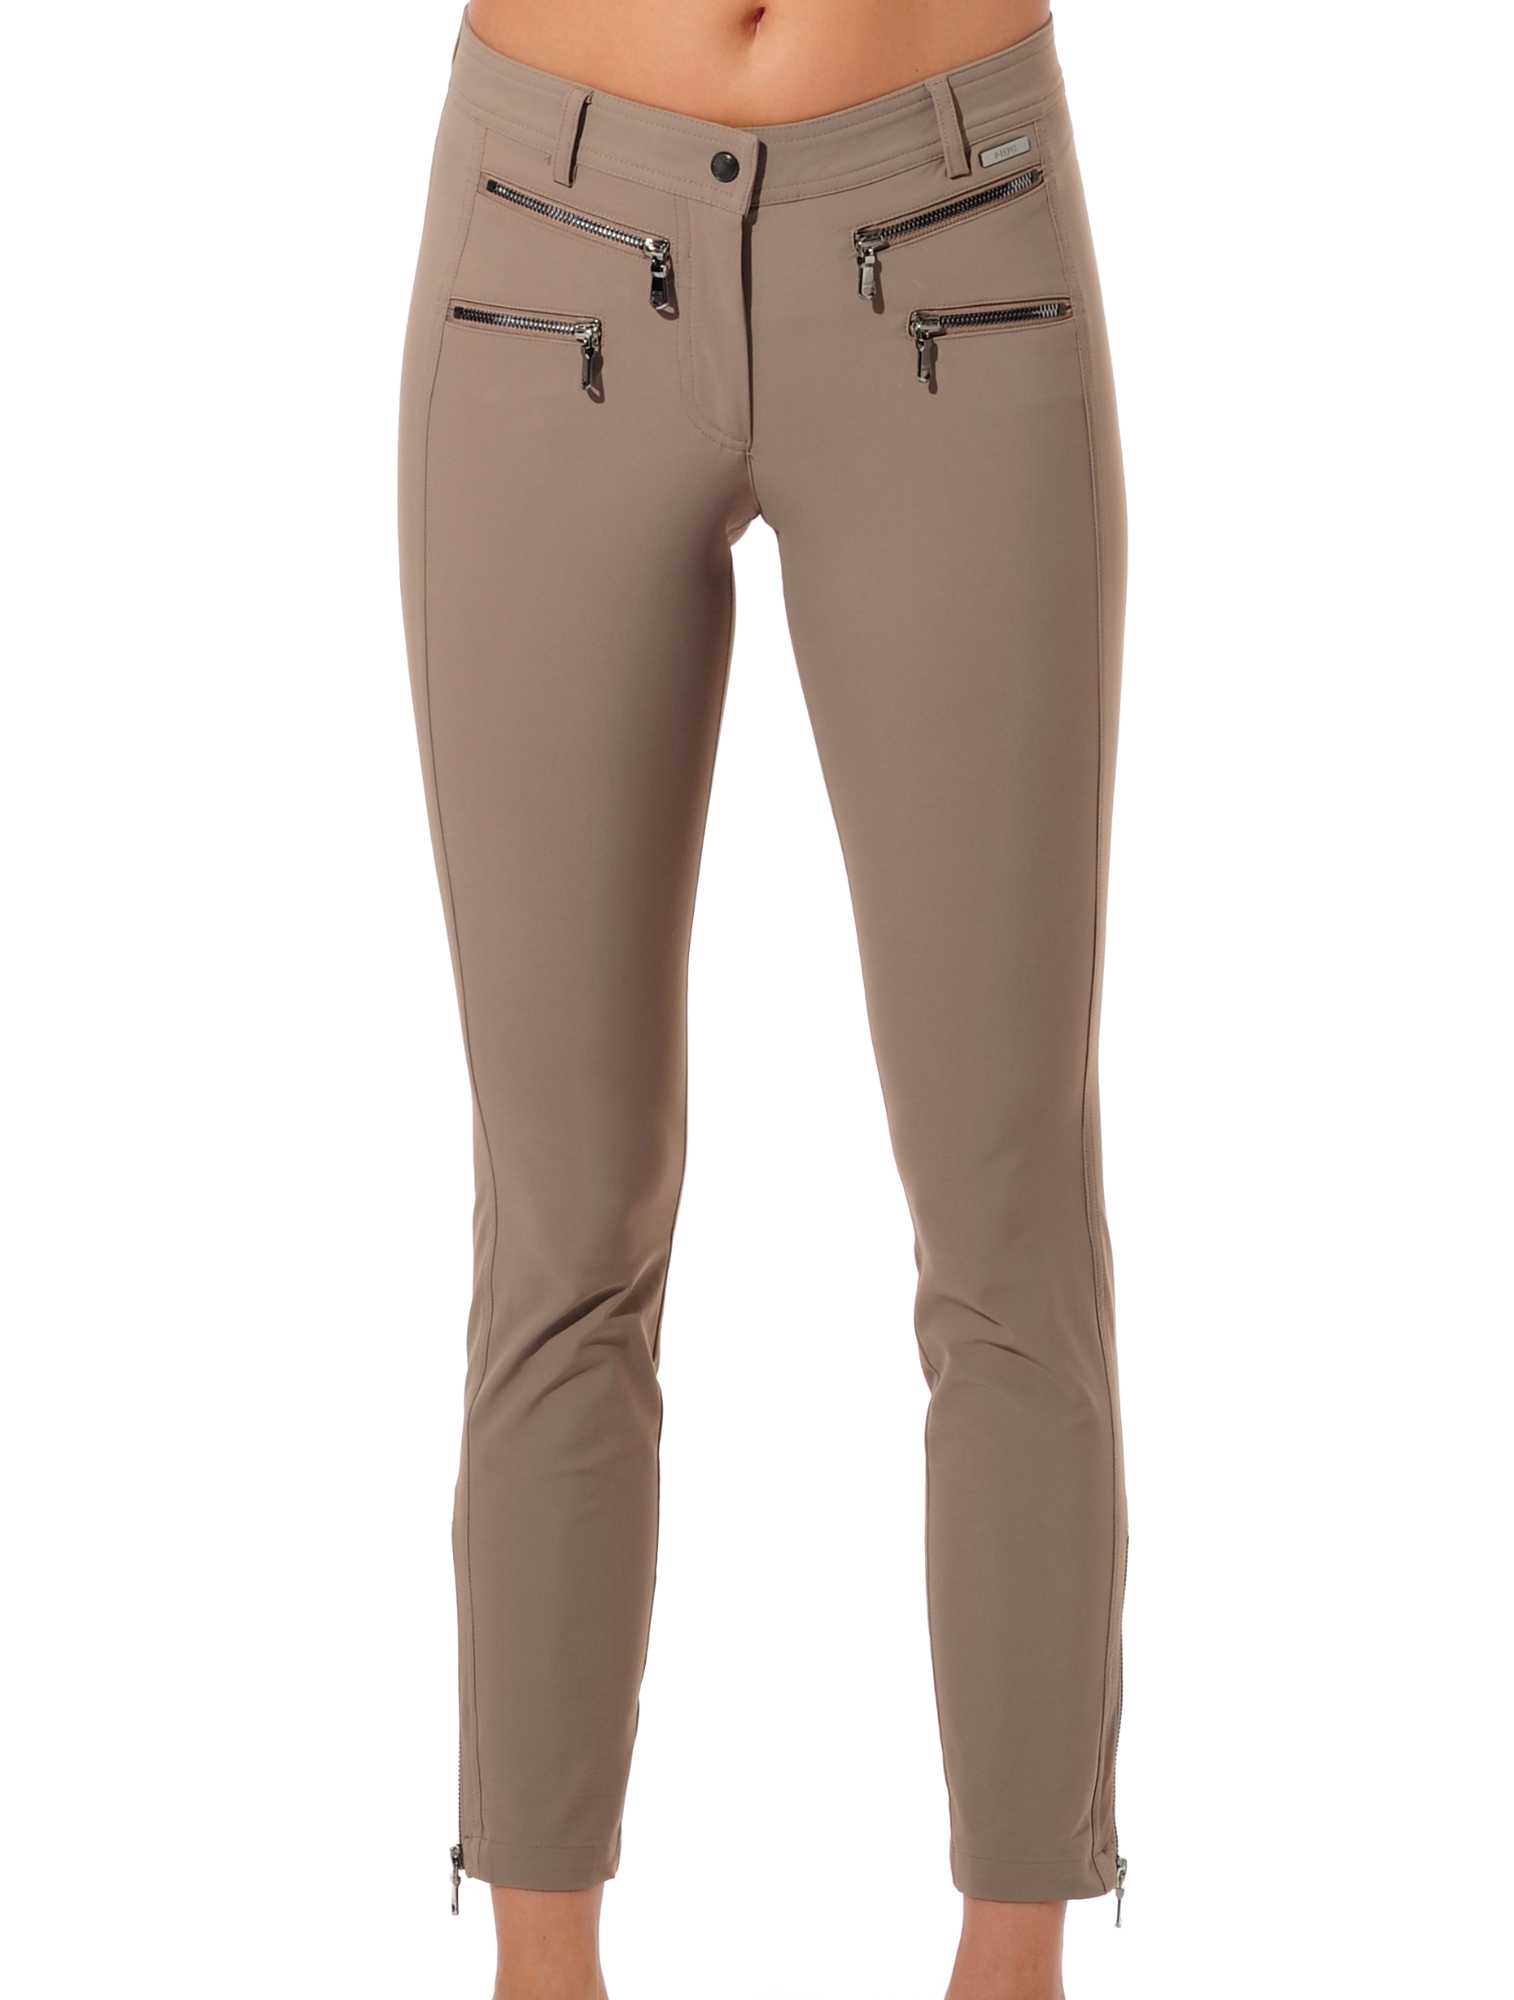 4way stretch double zip ankle pants toffee 